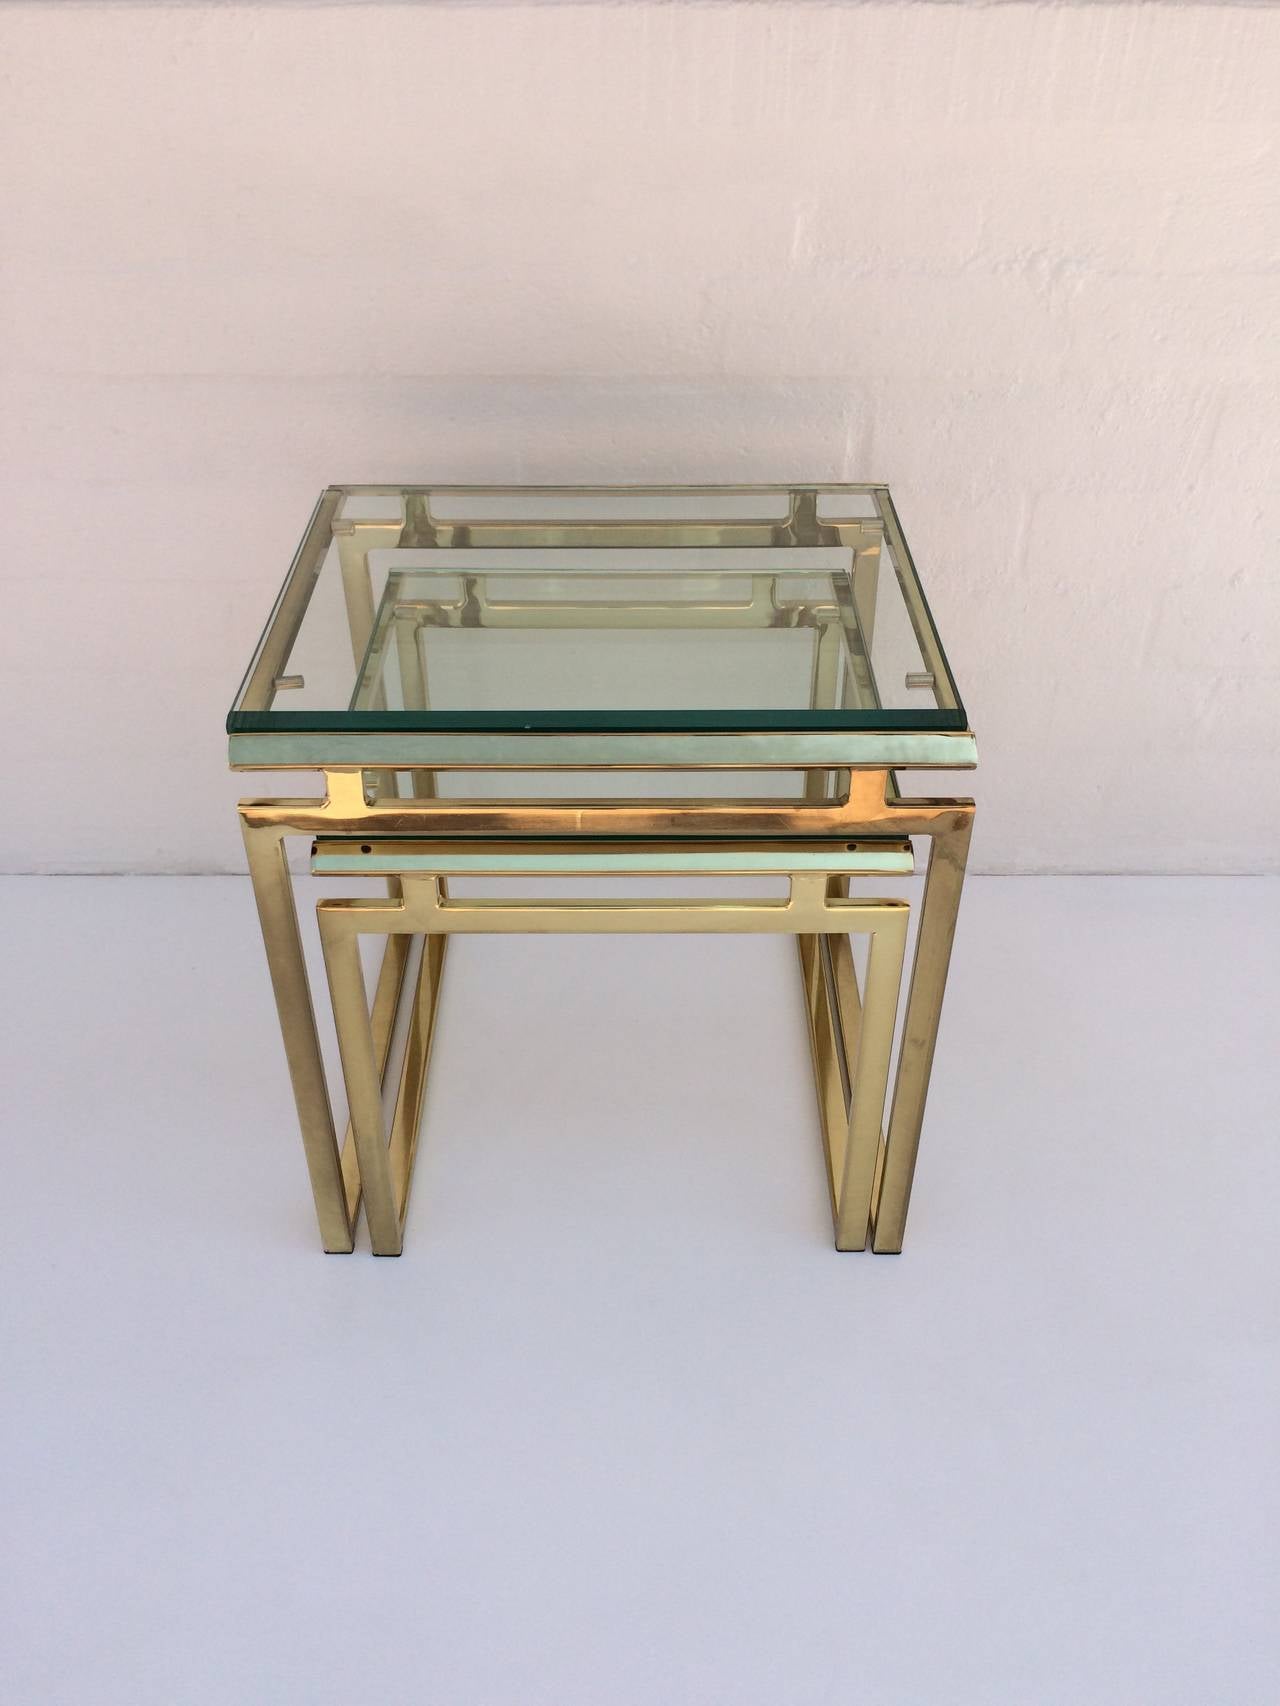 Polished Brass and Beveled Glass Nesting Tables Designed by Milo Baughman 1